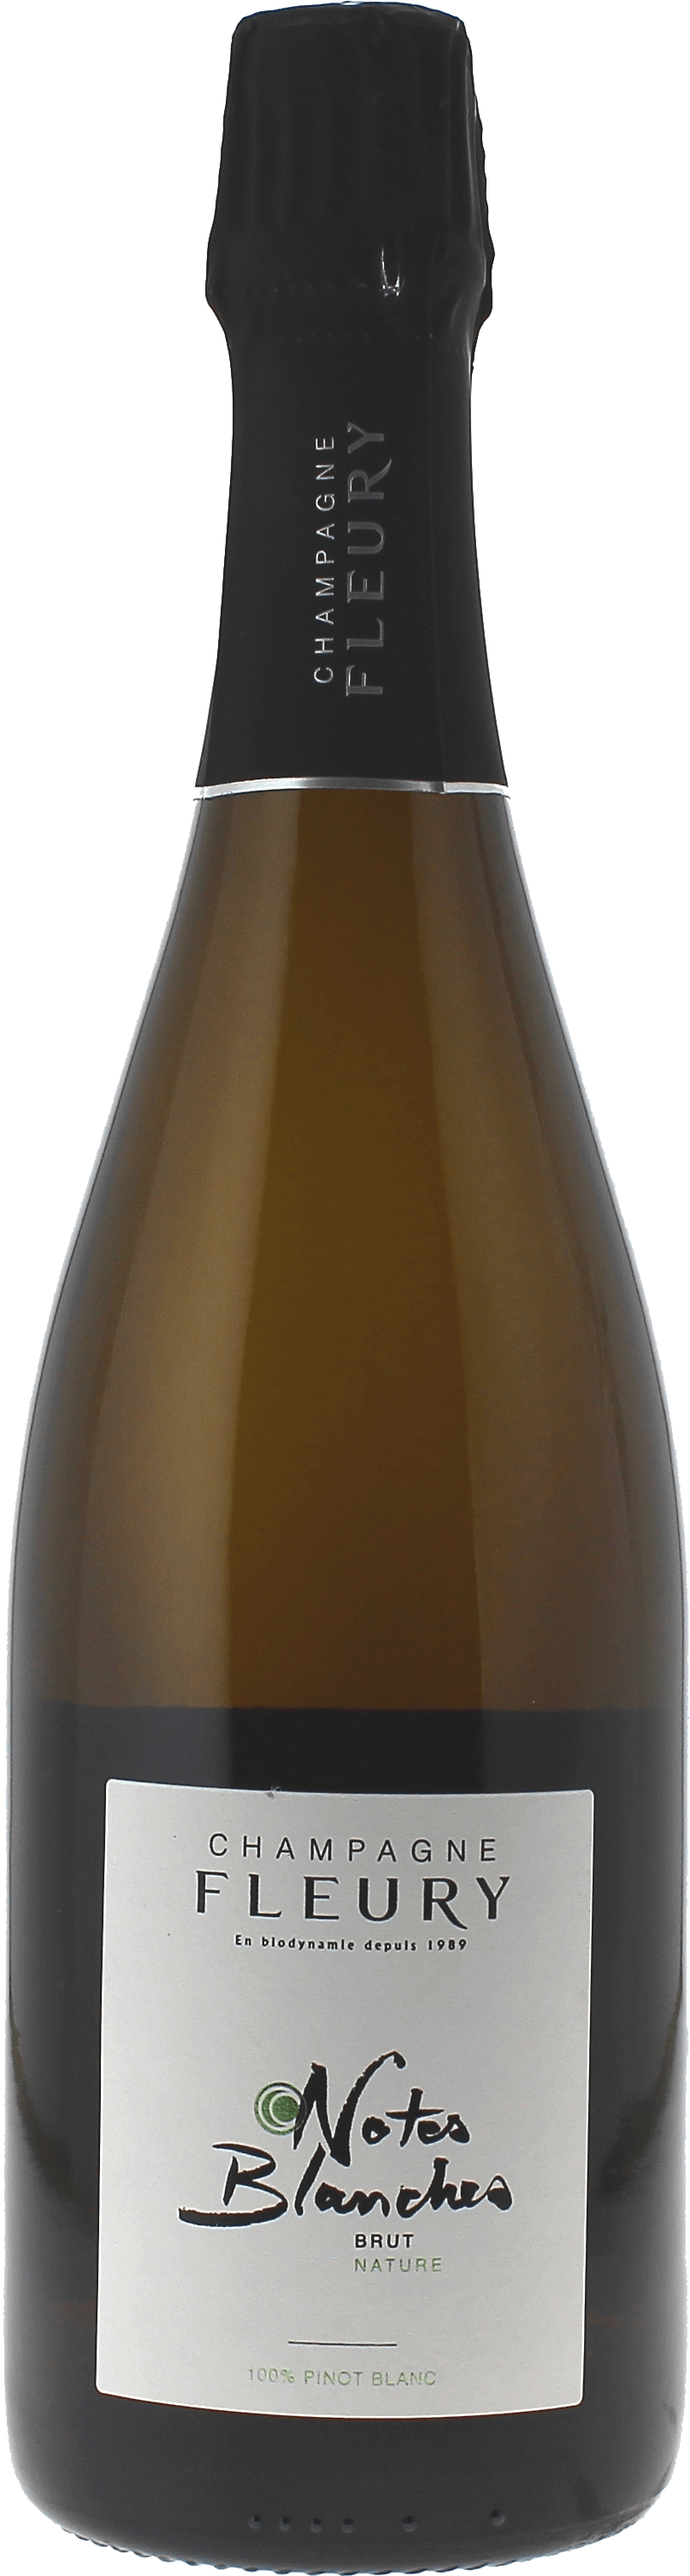 Fleury notes blanches 2016  Fleury, Champagne